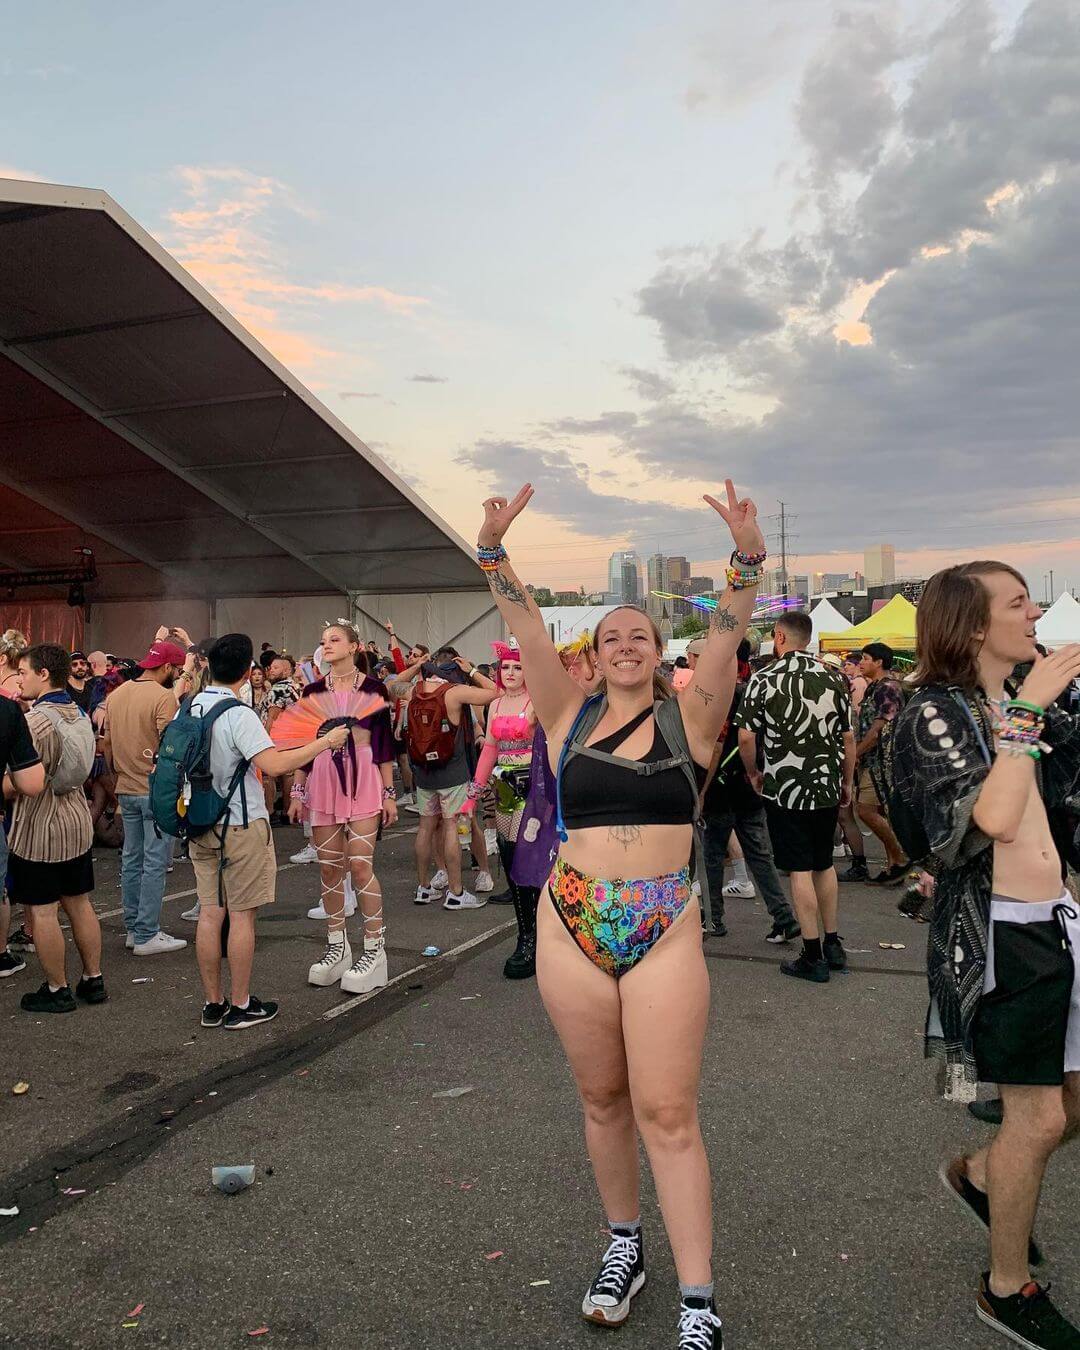 raver wears color psychedelic rave bottoms in the midst of a festival crowd exuding fun energy